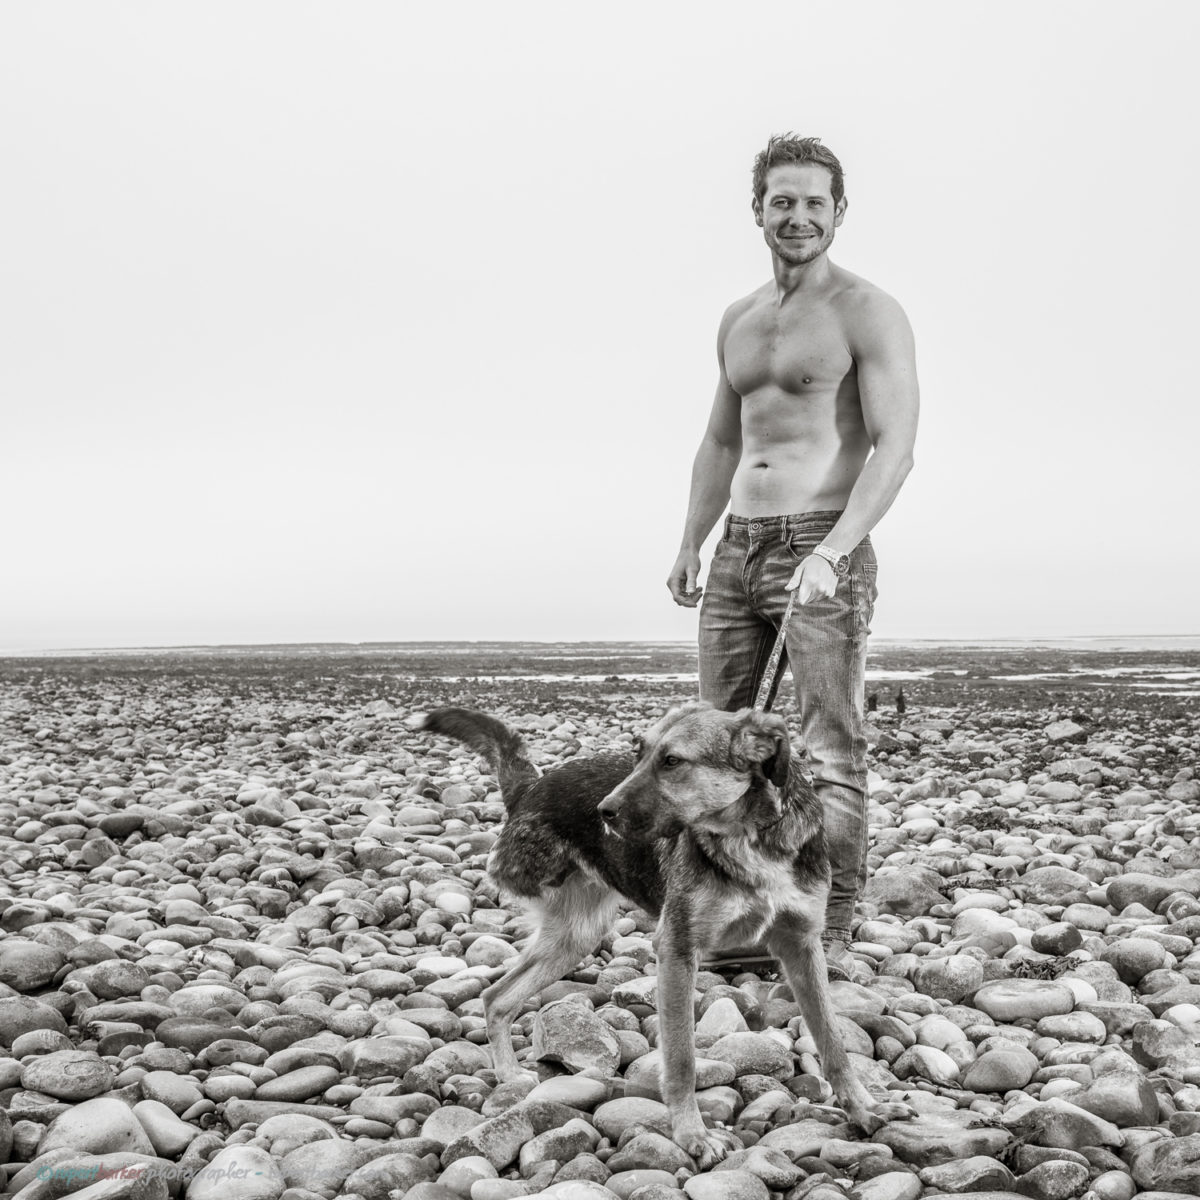 Topless Male Portrait with rescue dog Black and White Calendar shoot